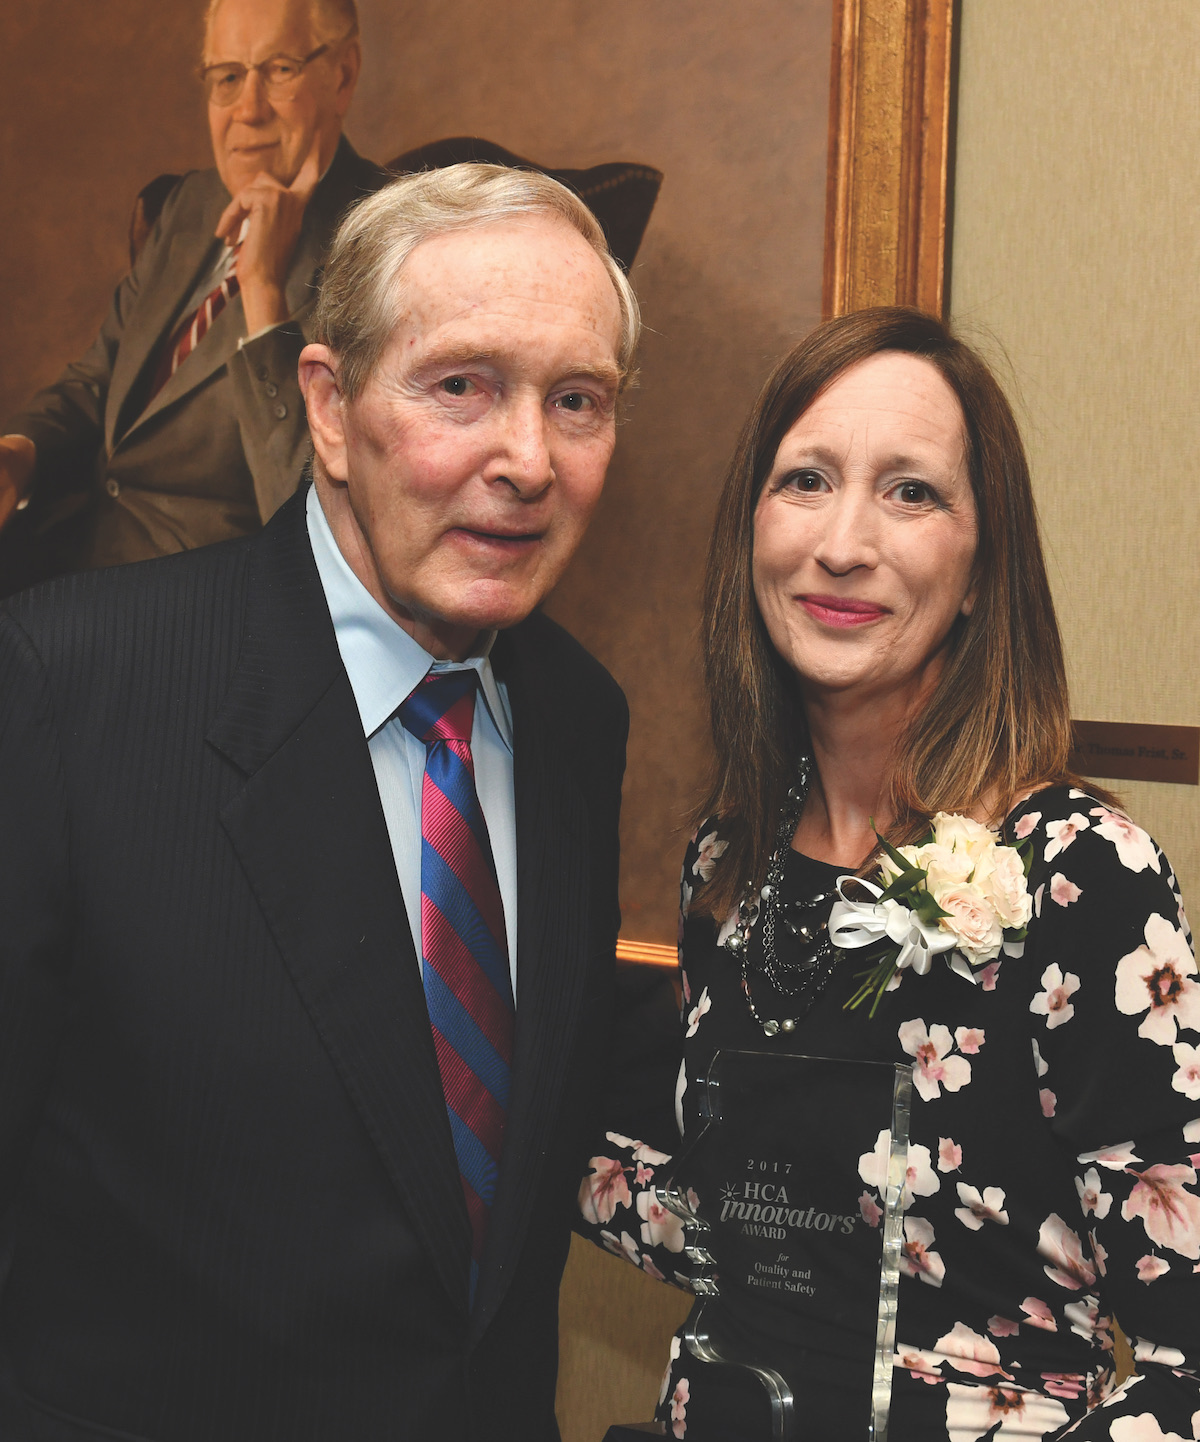 Man in suit and tie with woman in floral dress holding award